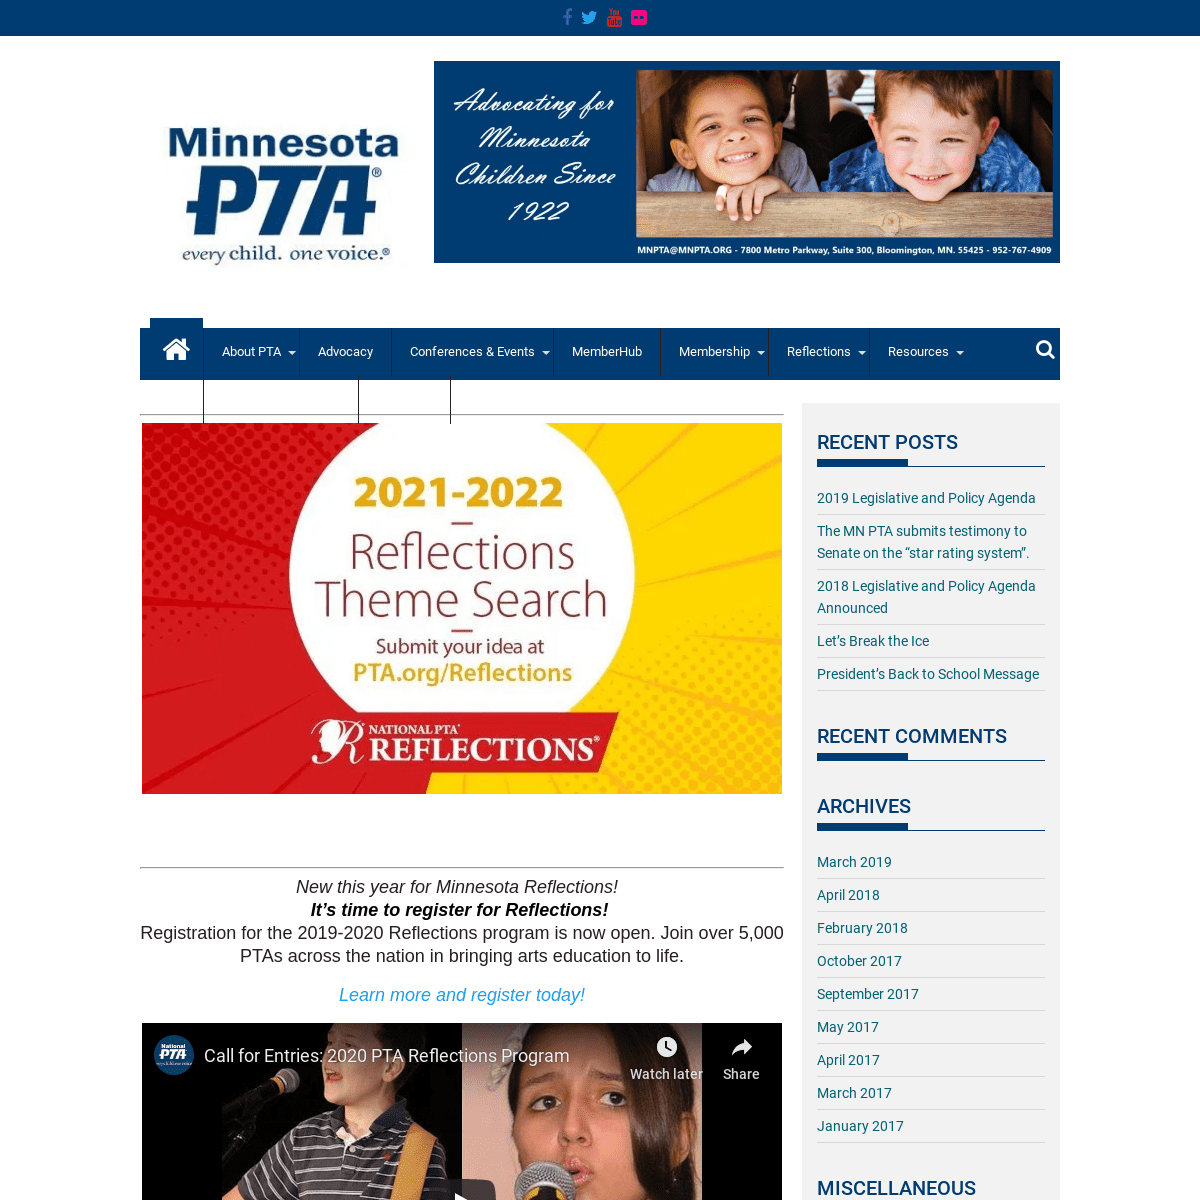 A complete backup of mnpta.org